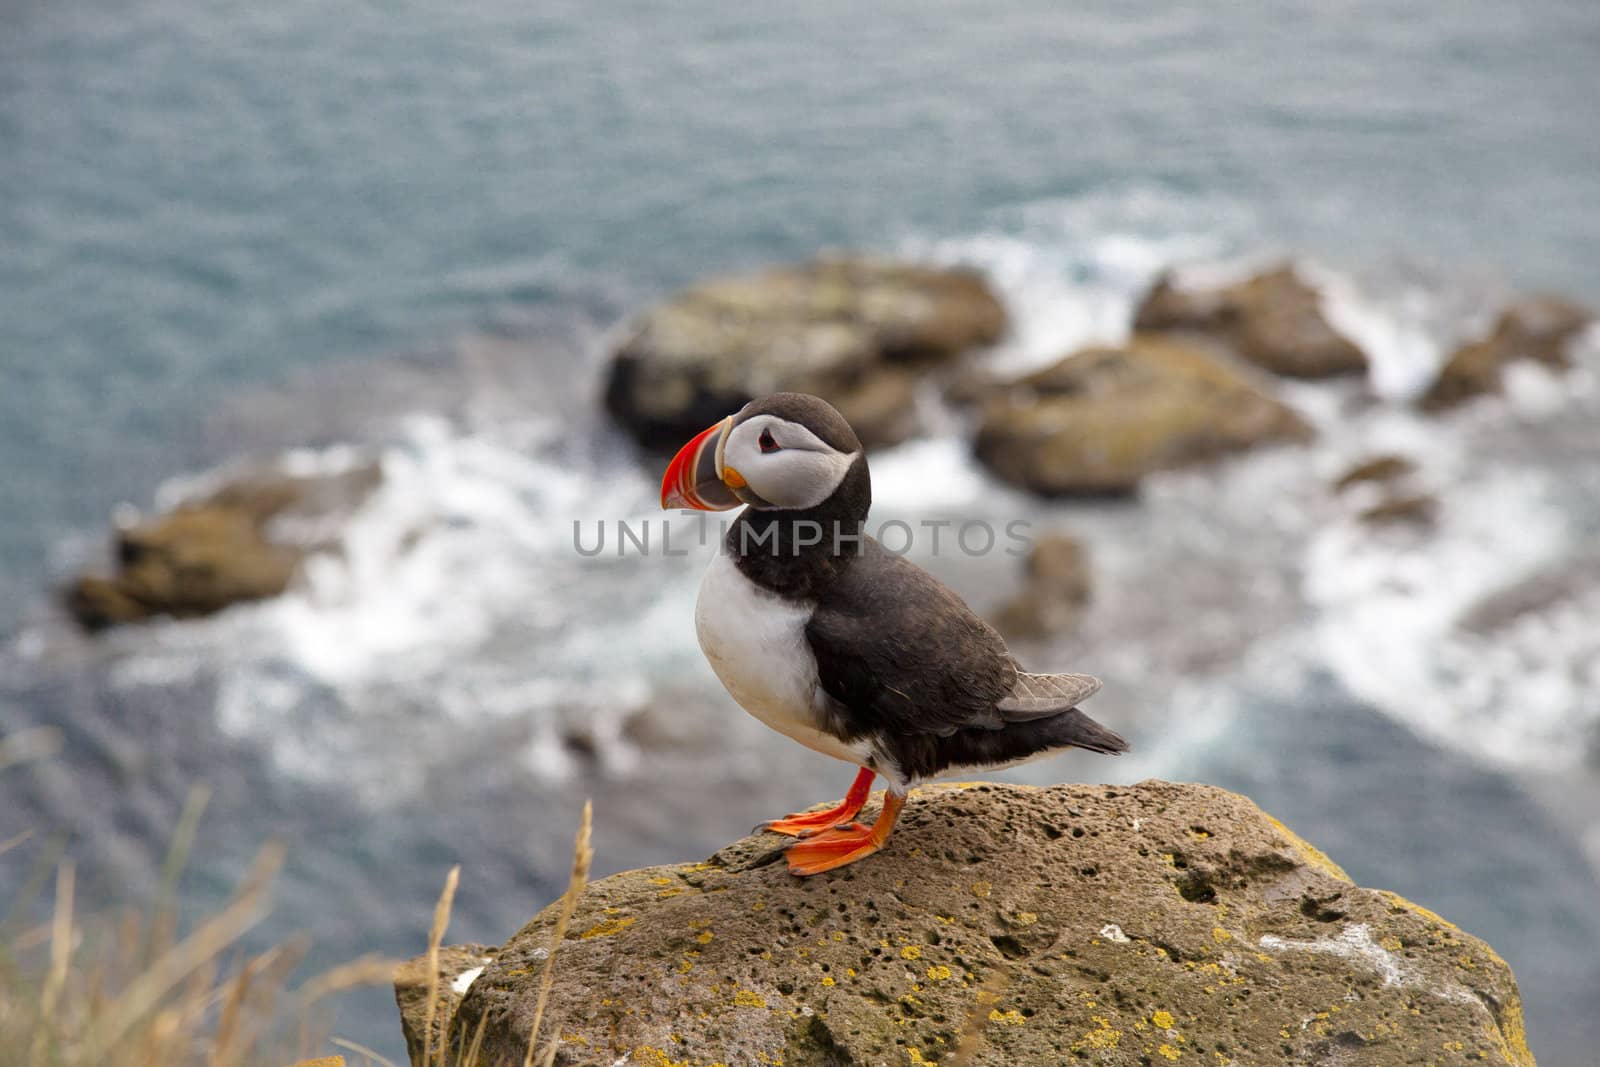 One puffin on the rock - Iceland by parys